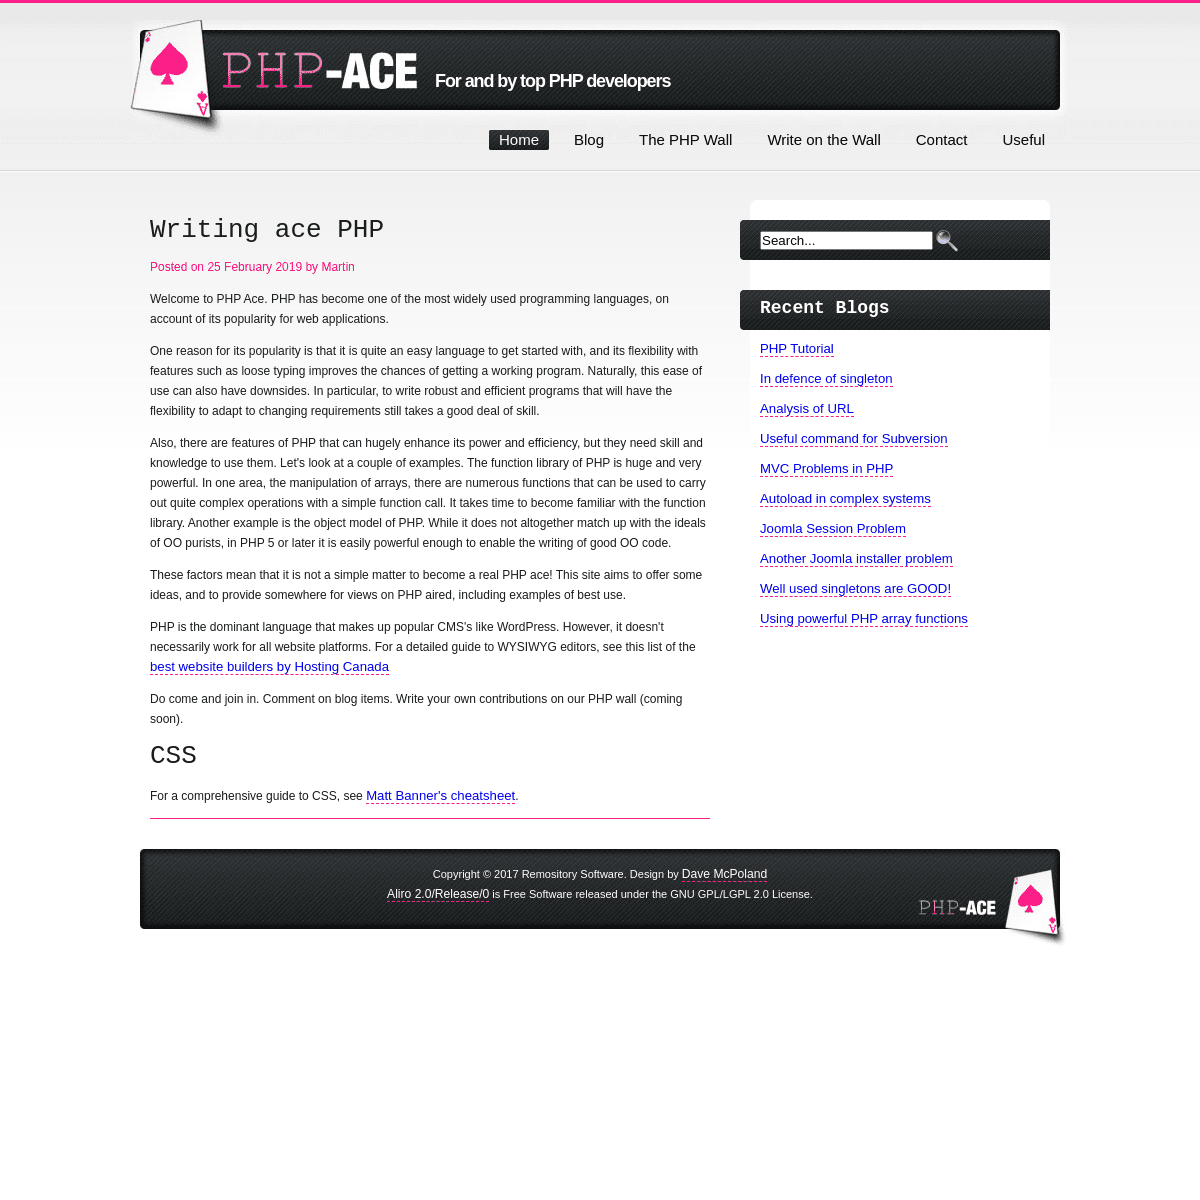 A complete backup of https://php-ace.com